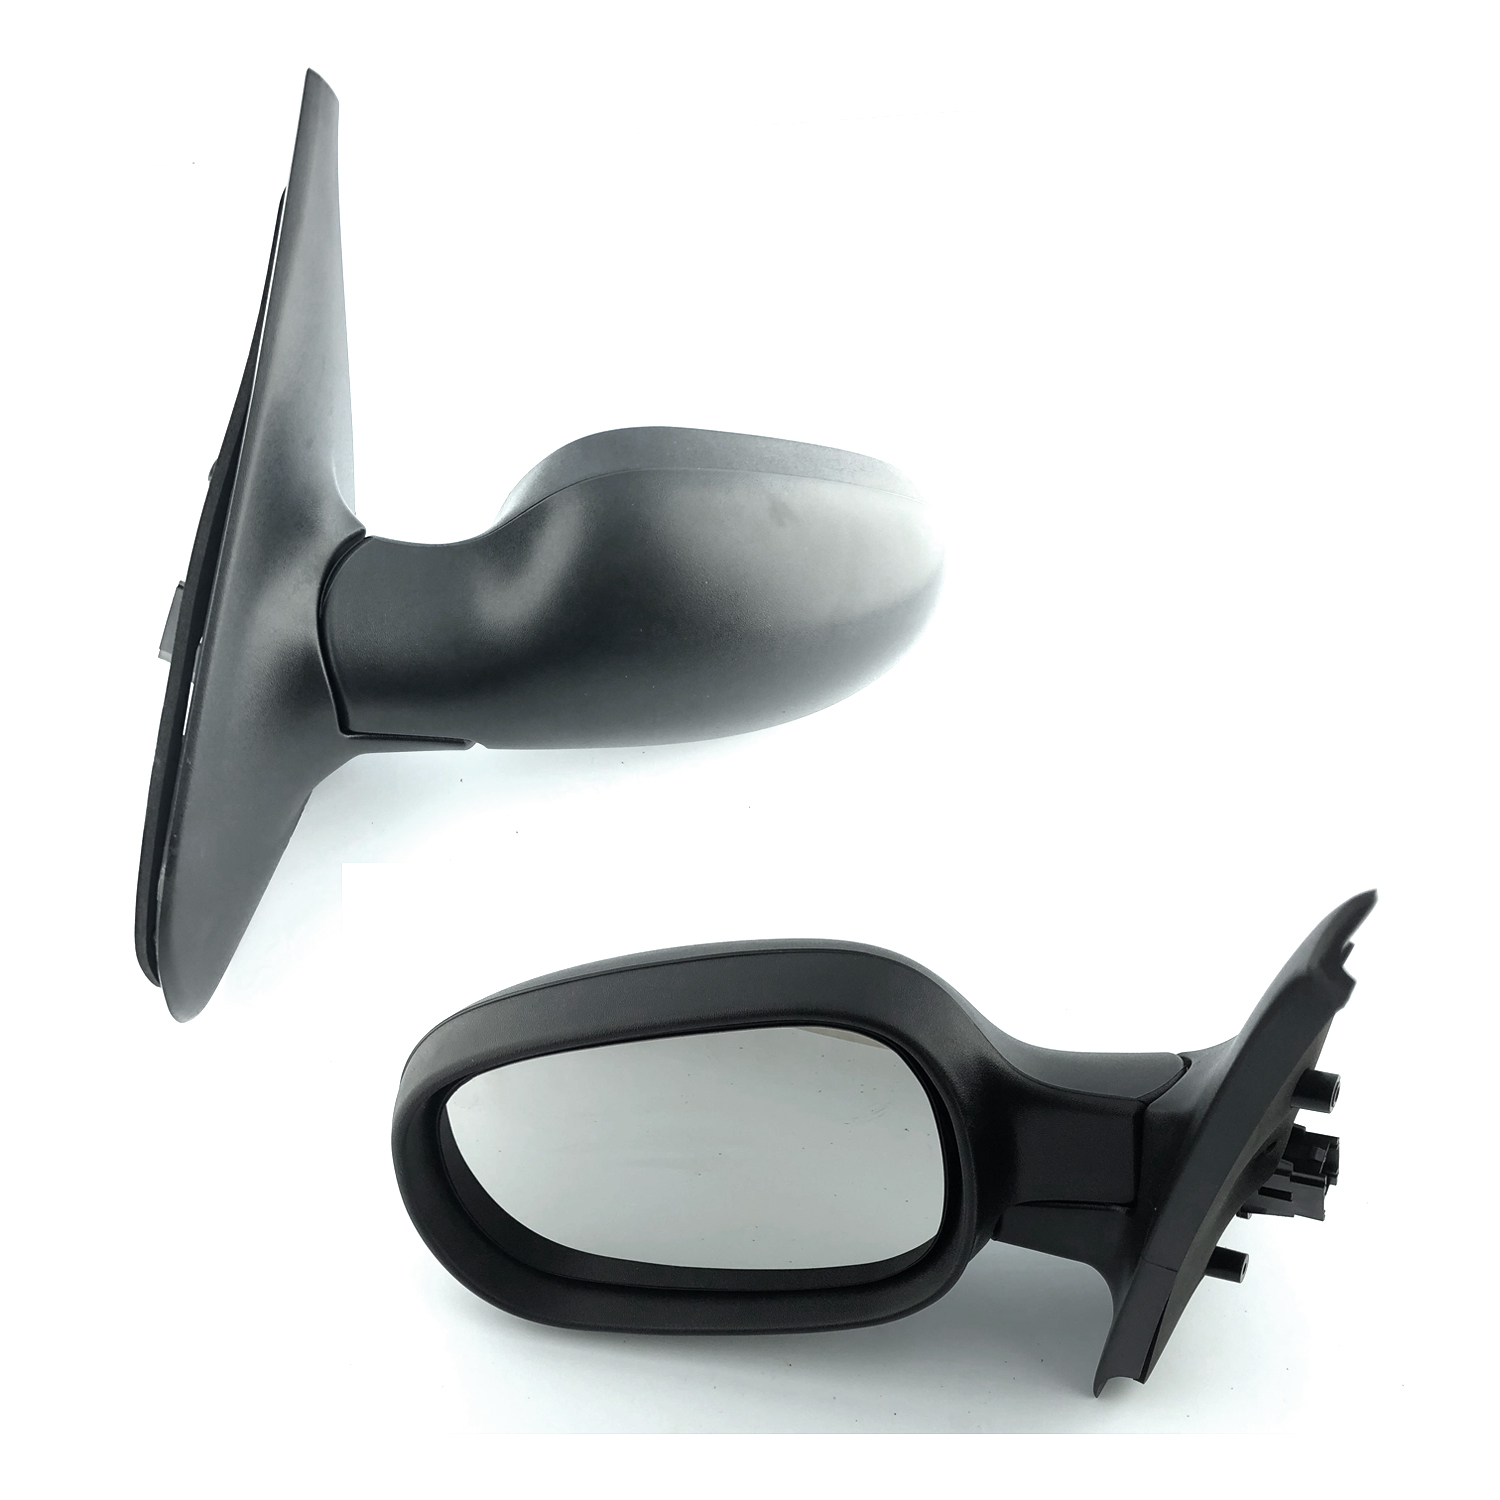 Renault Clio Complete Wing Mirror Unit LEFT HAND ( UK Passenger Side ) 1998 to 2009 [ MK II ] – Electric Wing Mirror Unit